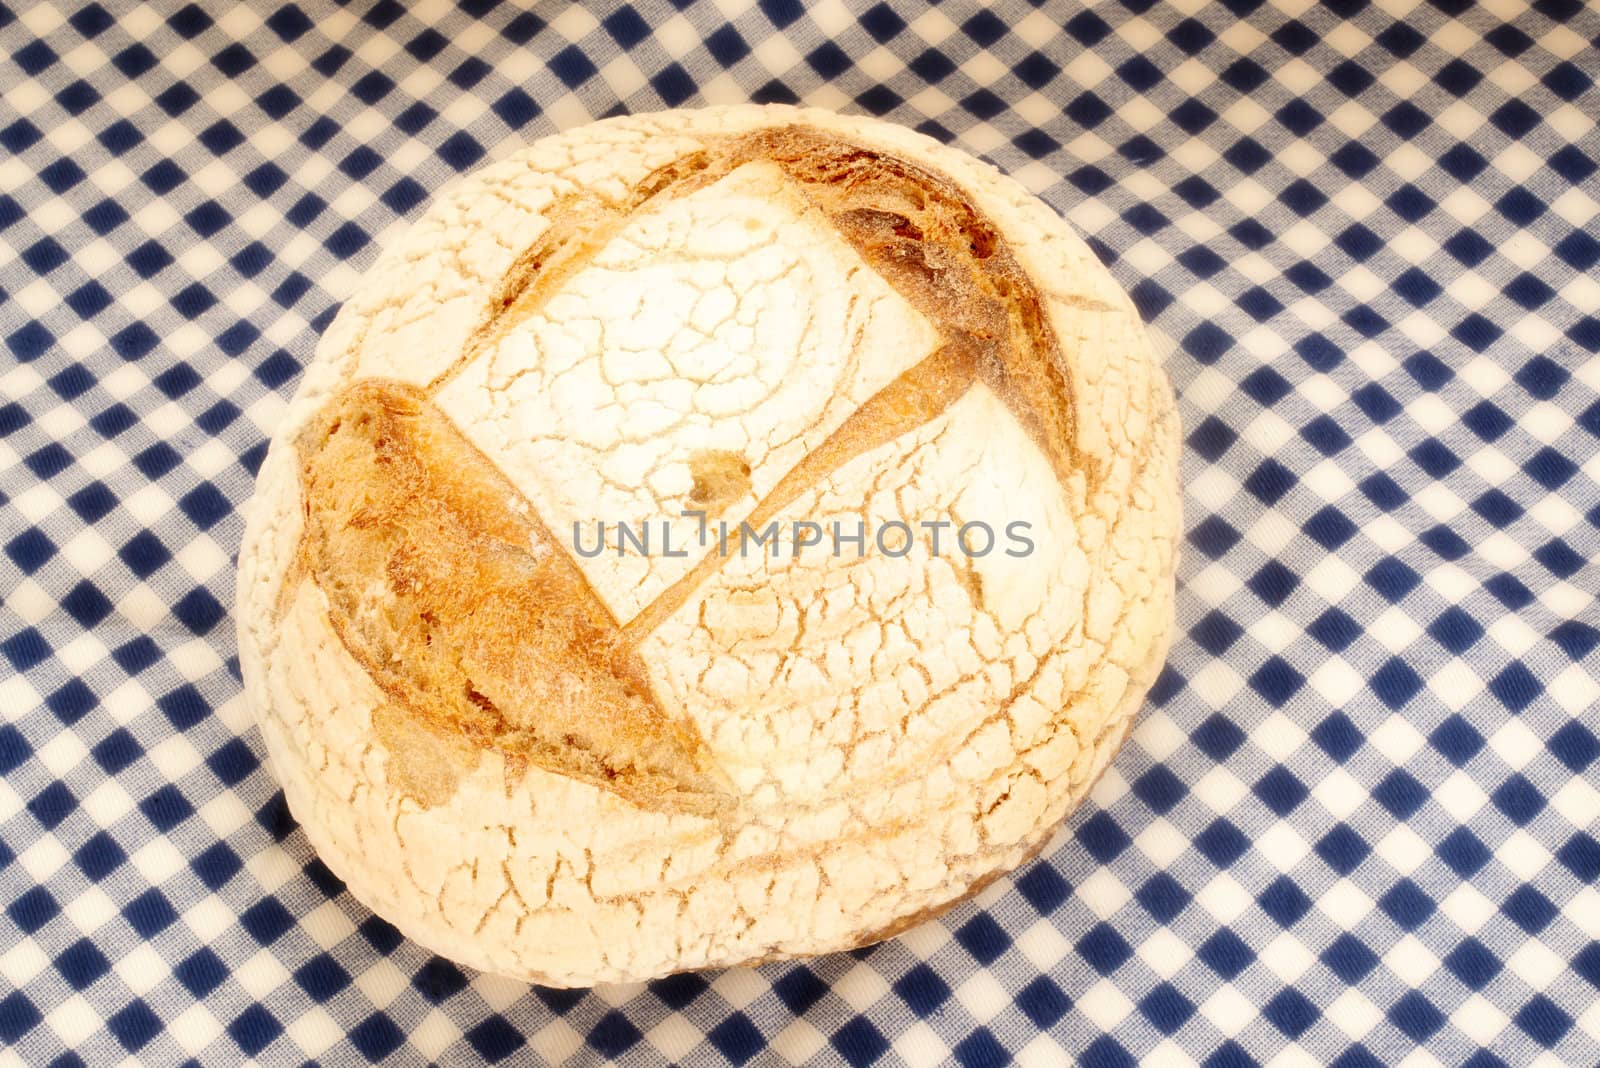 rustic organic bread made by hand on a blue checkered tablecloth